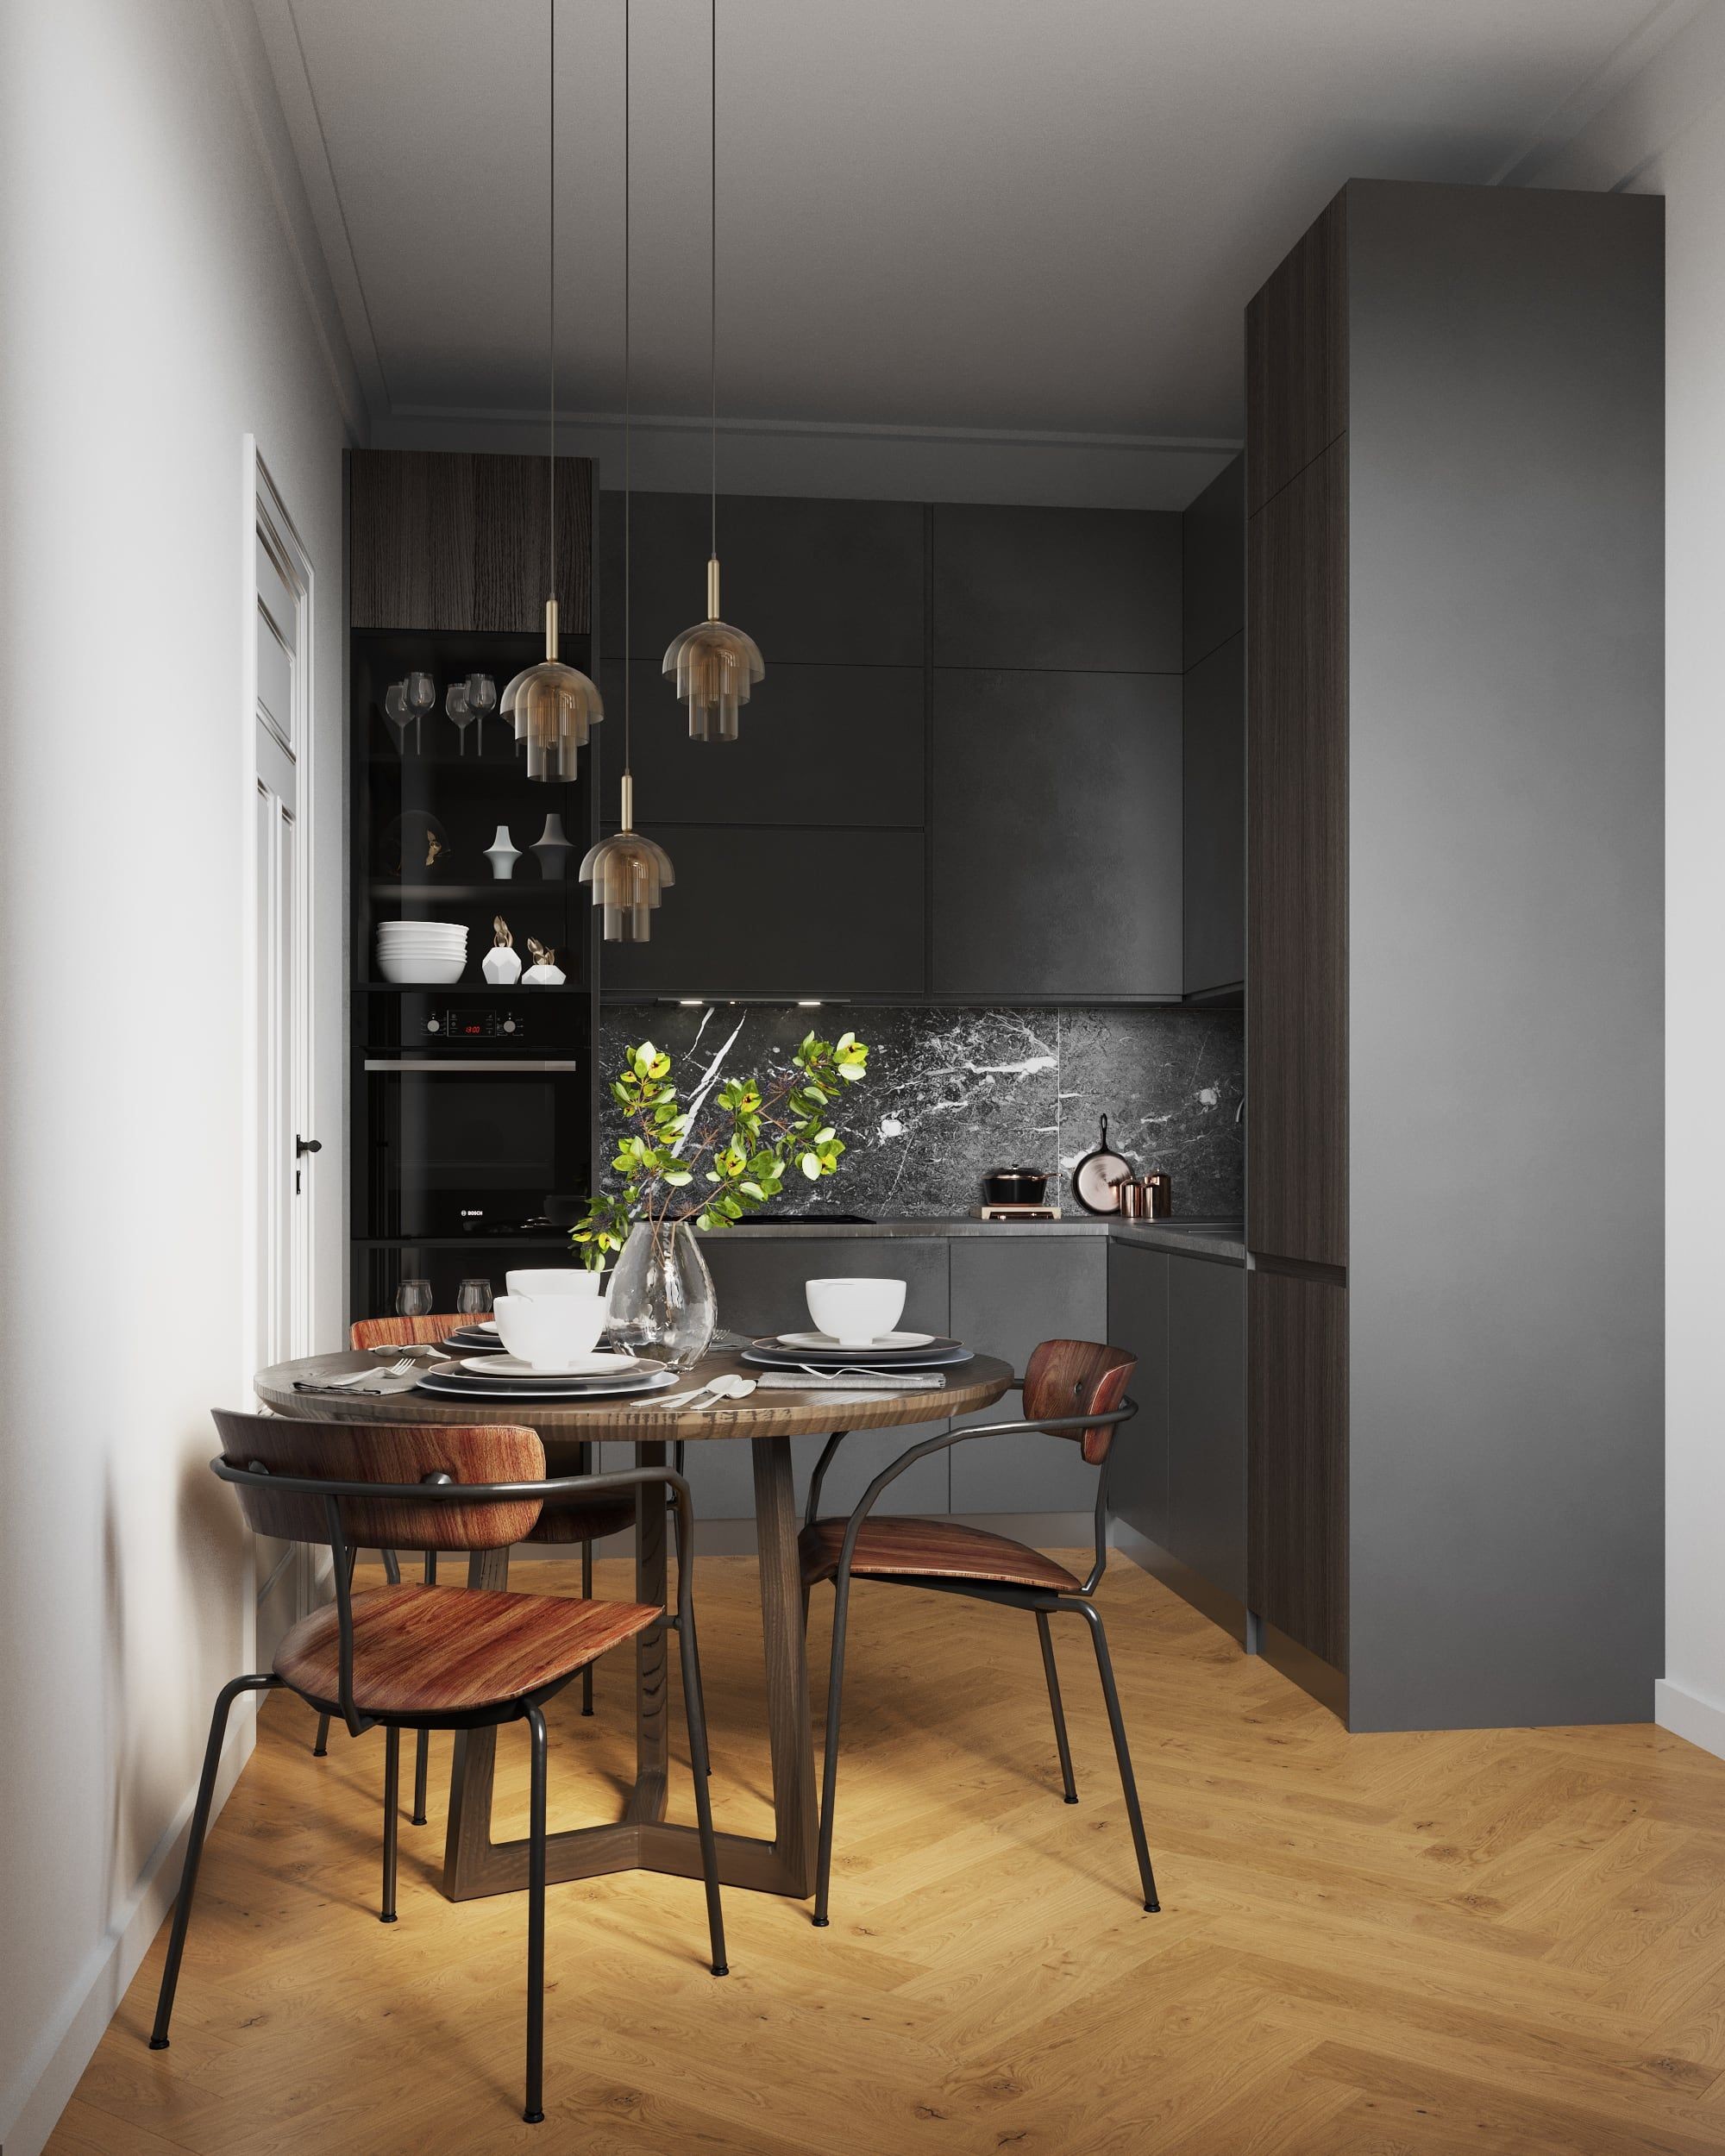 3D Architectural Visualization of Kitchen with dining area in a small apartment in Hindenburgstraße Erlangen, Germany